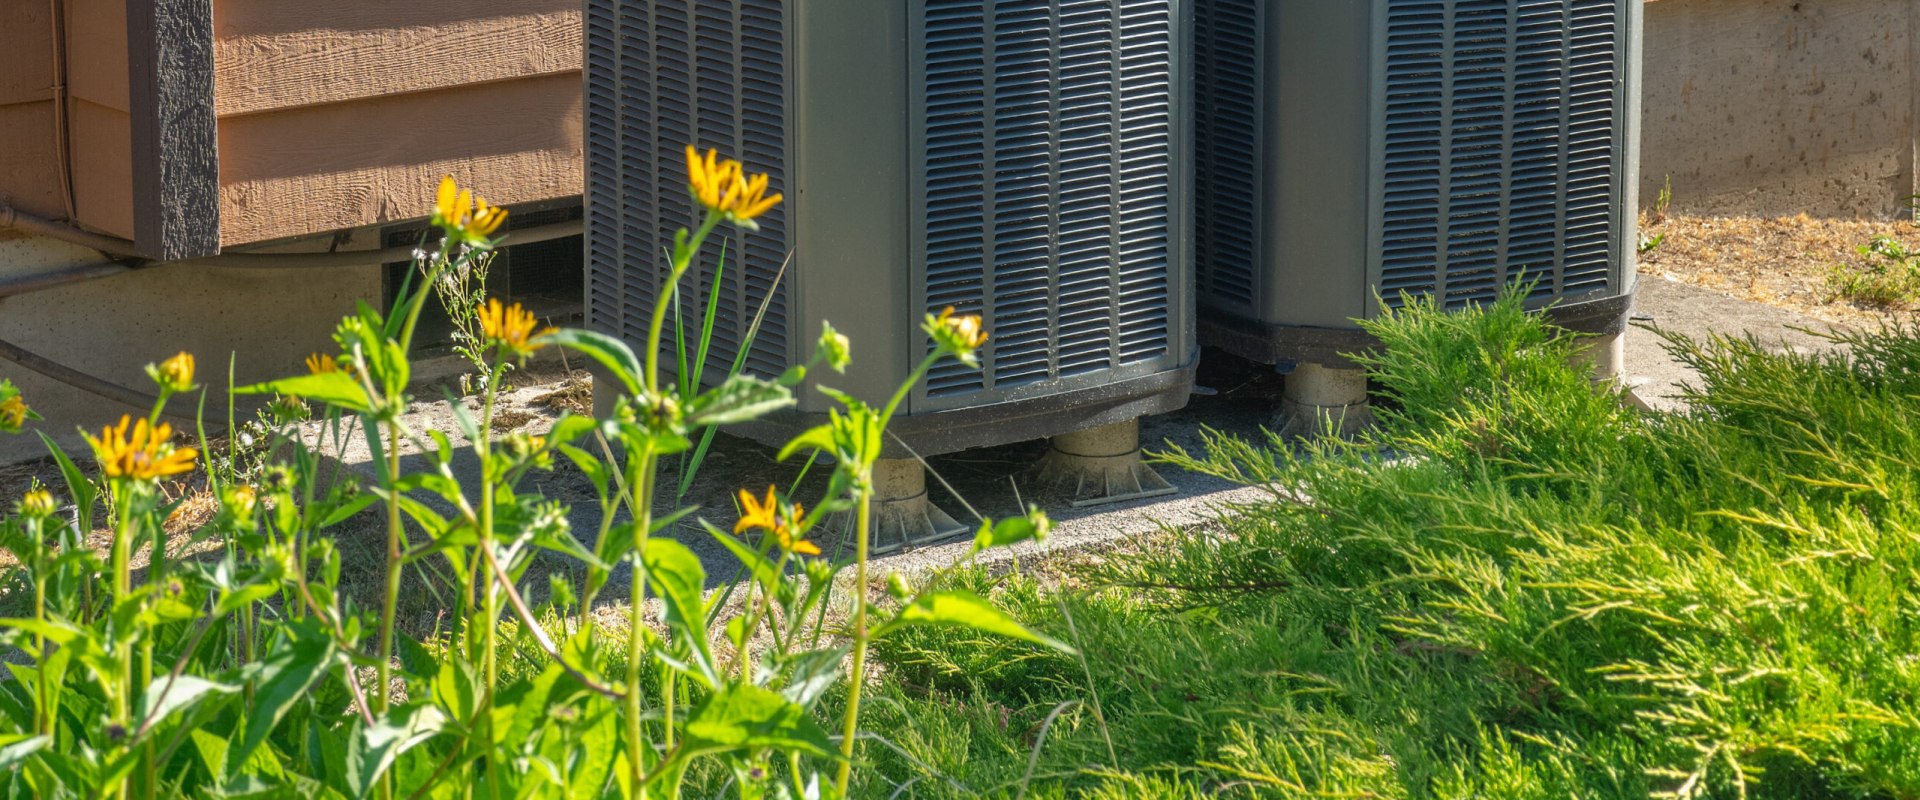 Is Replacing the Compressor on an AC Unit Worth It?